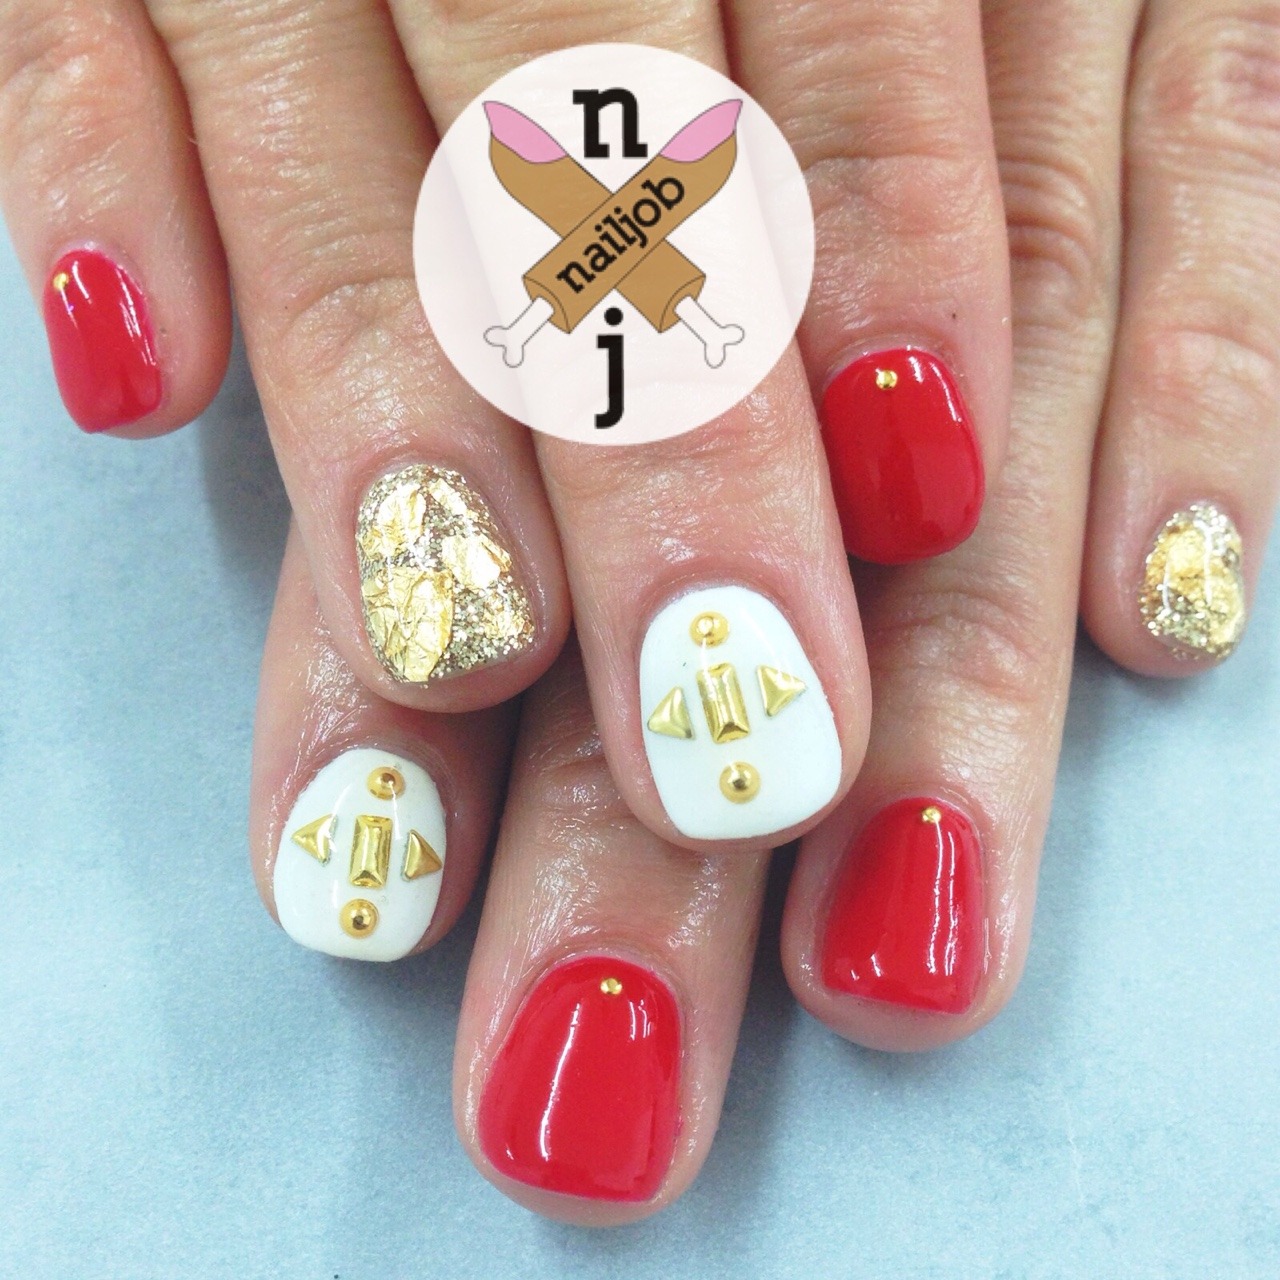 Queen of Hearts Nail Designs